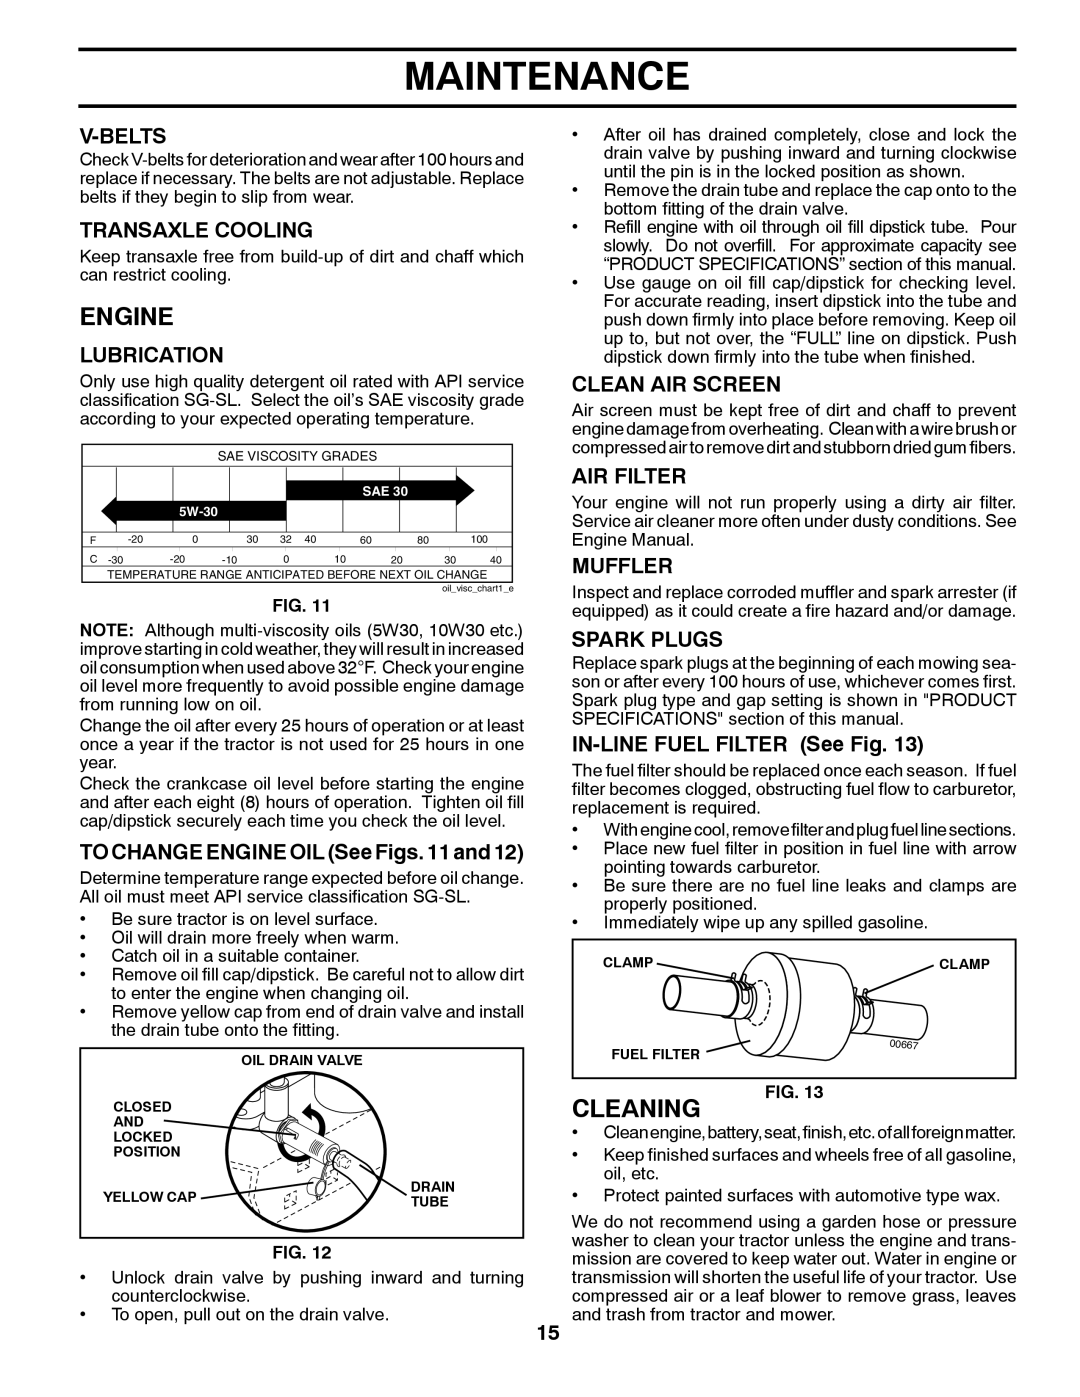 Poulan 424368 Engine, Cleaning, V-Belts, Transaxle Cooling, Lubrication, TO CHANGE ENGINE OIL See Figs. 11 and, Air Filter 